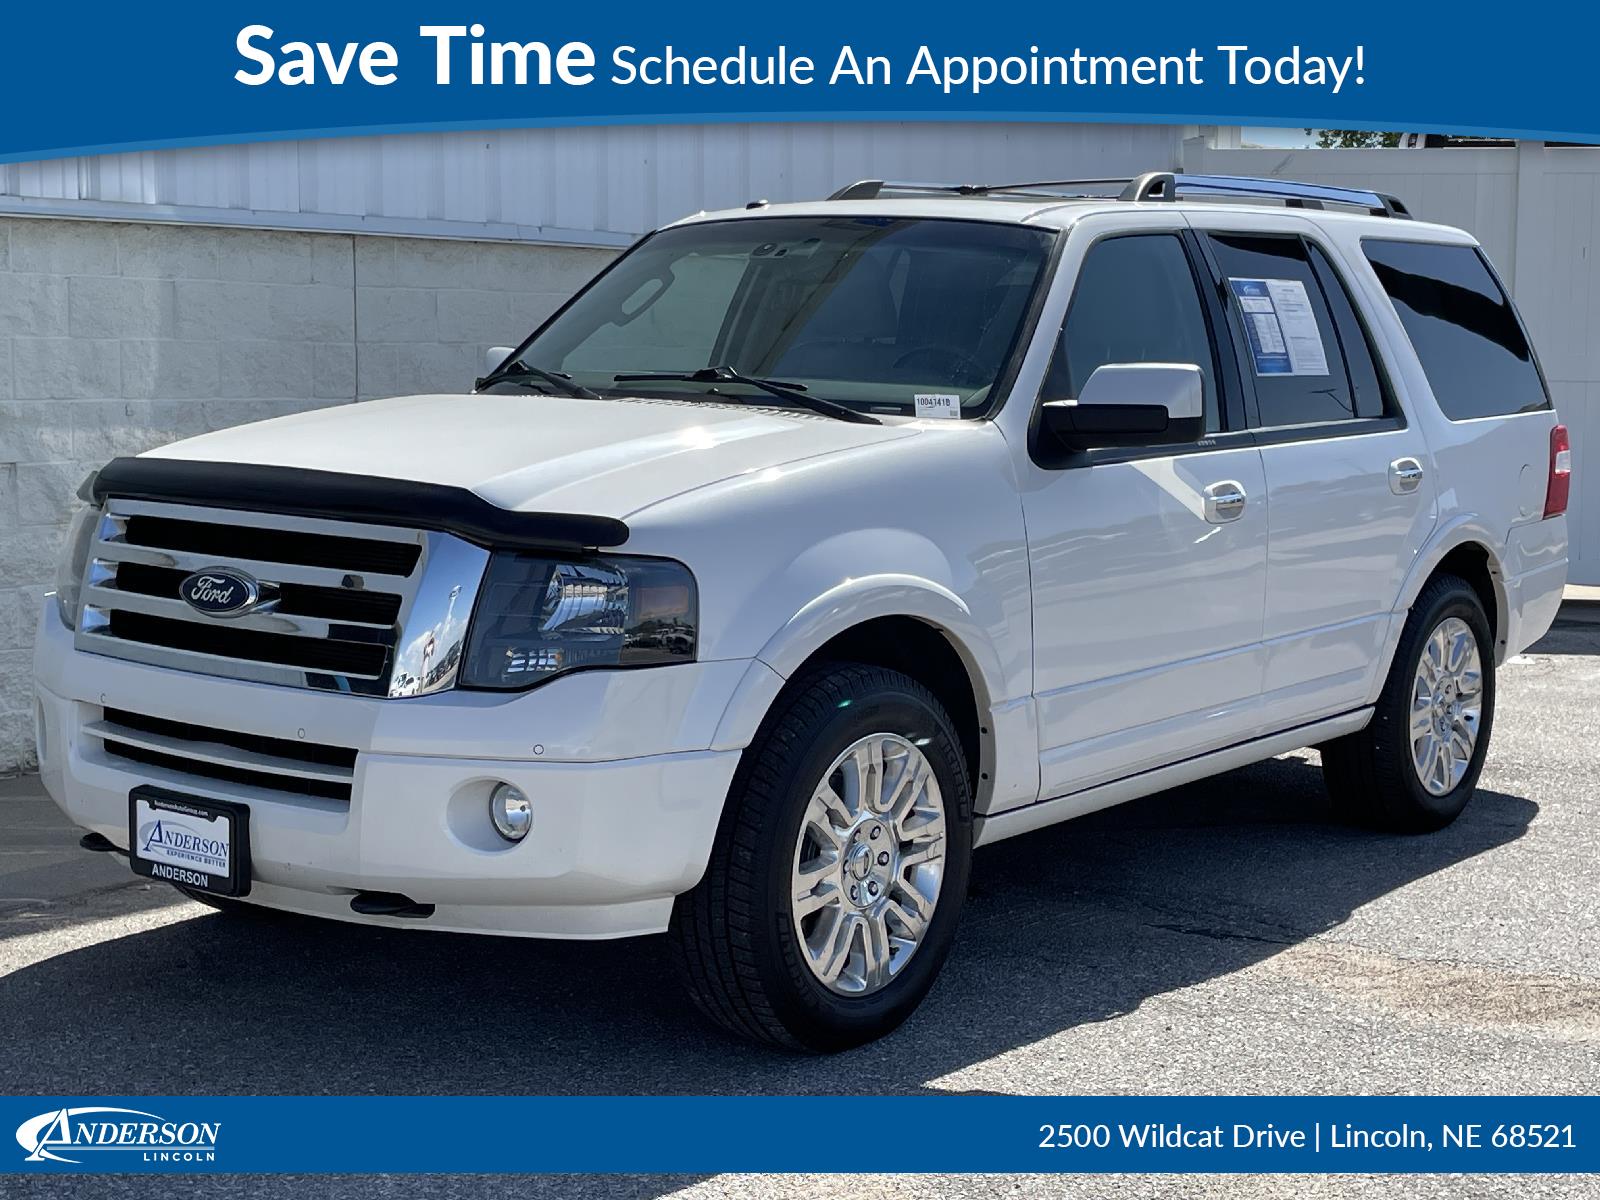 Used 2014 Ford Expedition Limited Stock: 1004141B